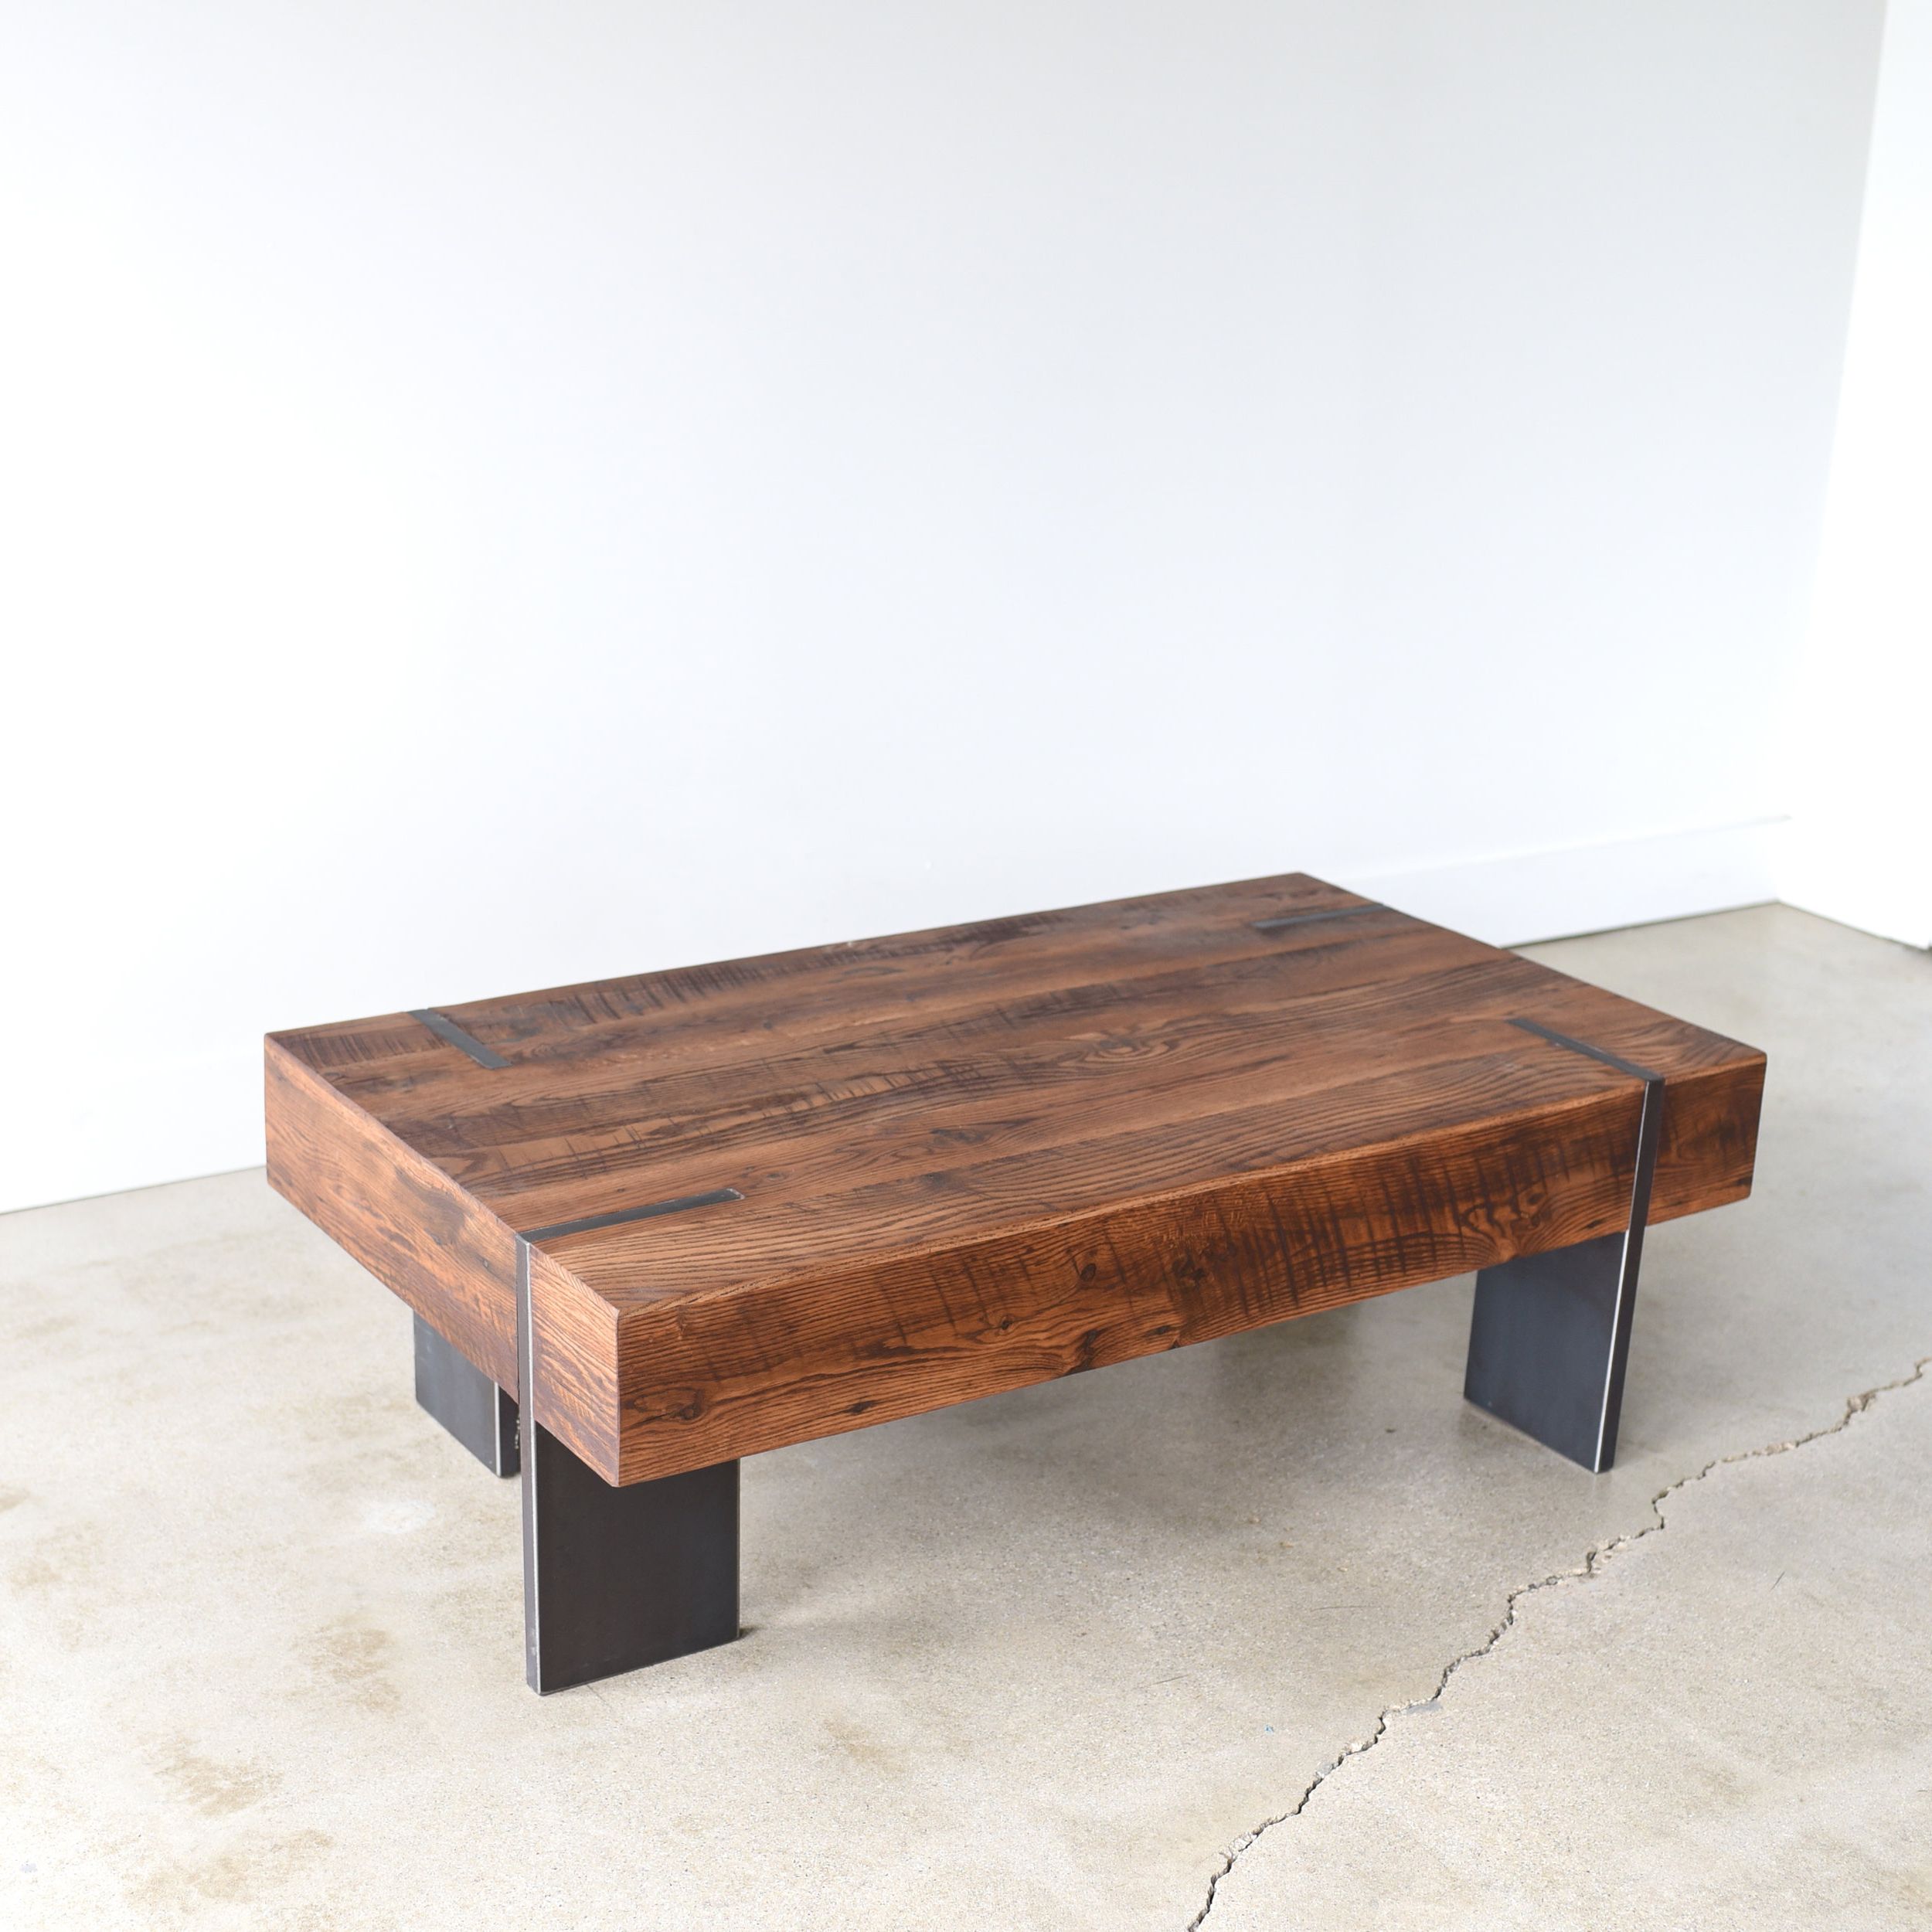 Reclaimed Wood Coffee Tables Intended For Most Popular Large Modern Reclaimed Wood Coffee Table – What We Make (View 2 of 10)